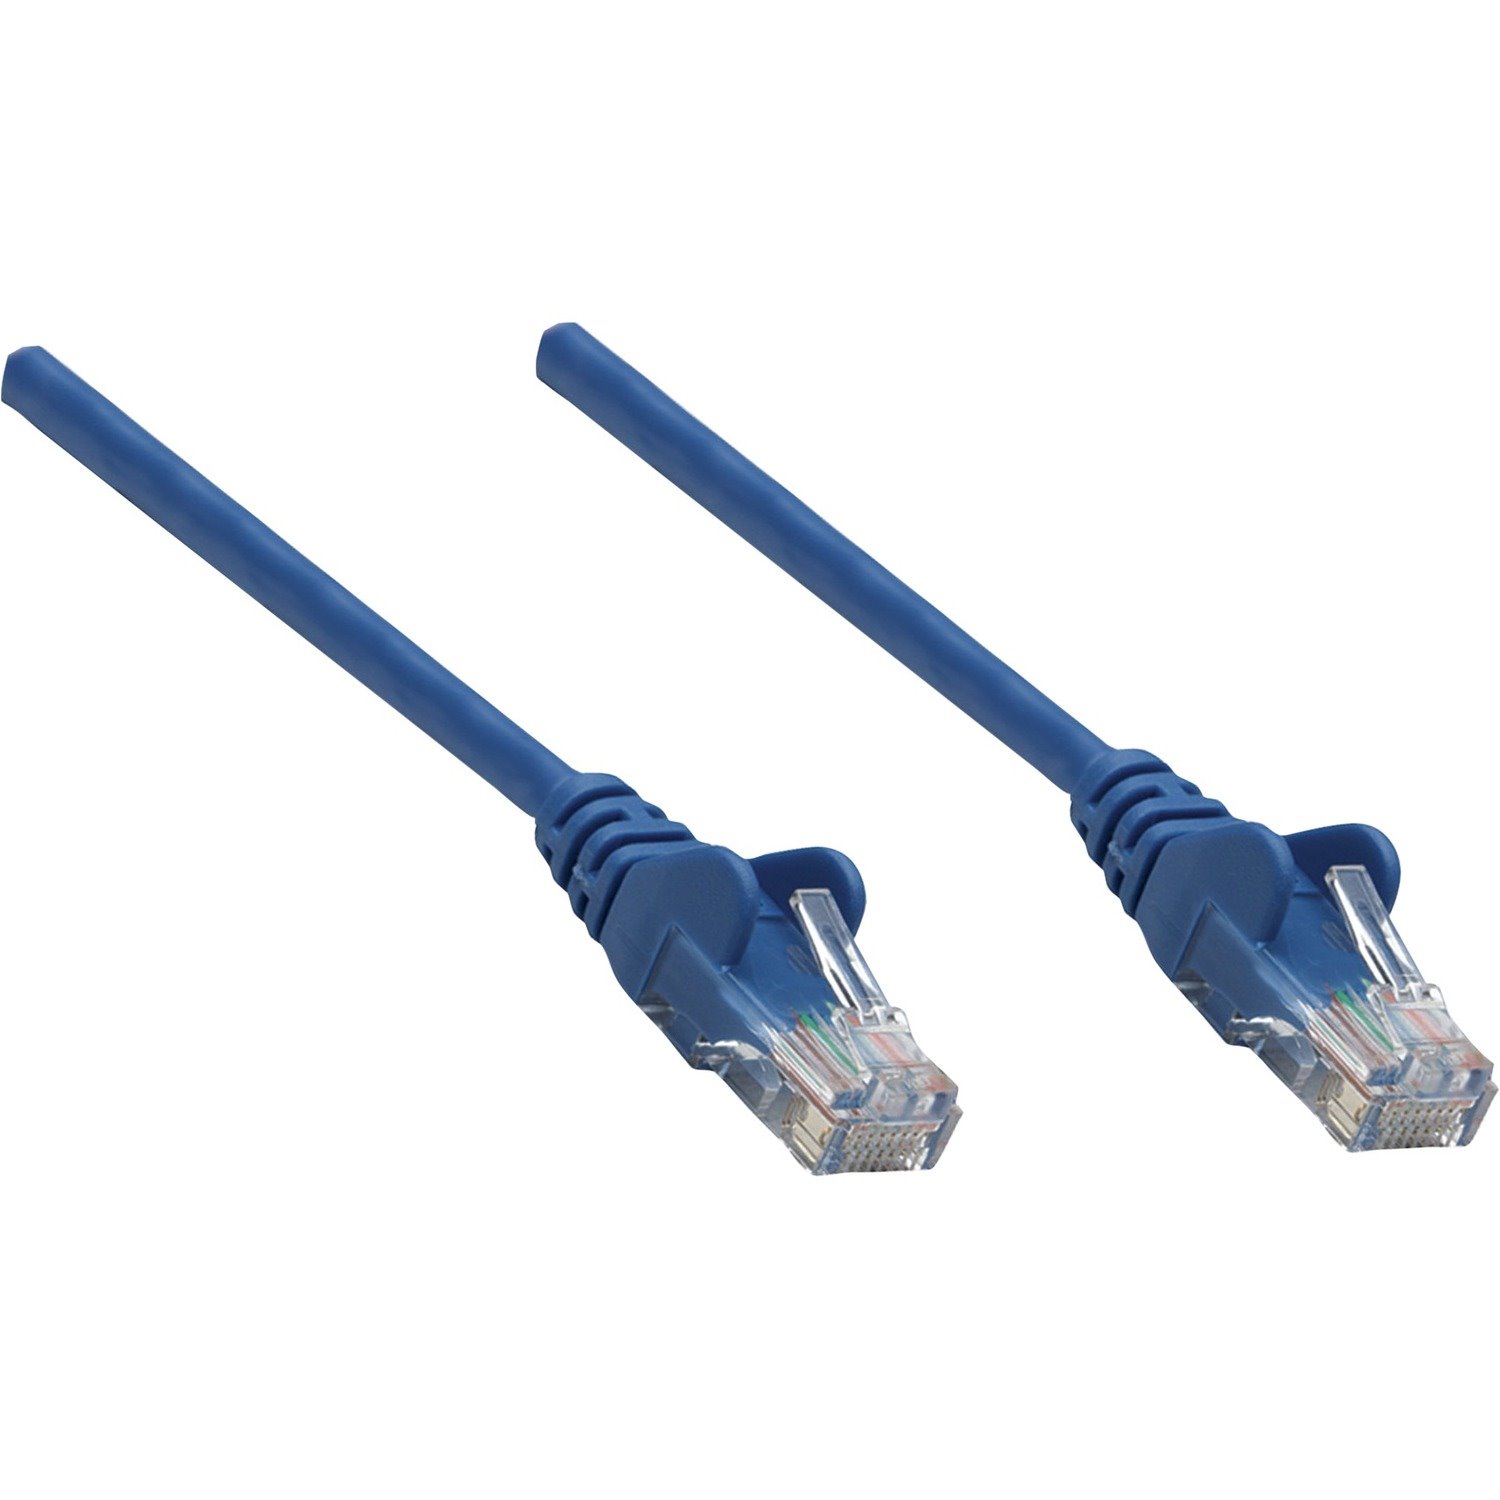 Intellinet Network Patch Cable, Cat5e, 1m, Blue, CCA, U/UTP, PVC, RJ45, Gold Plated Contacts, Snagless, Booted, Lifetime Warranty, Polybag